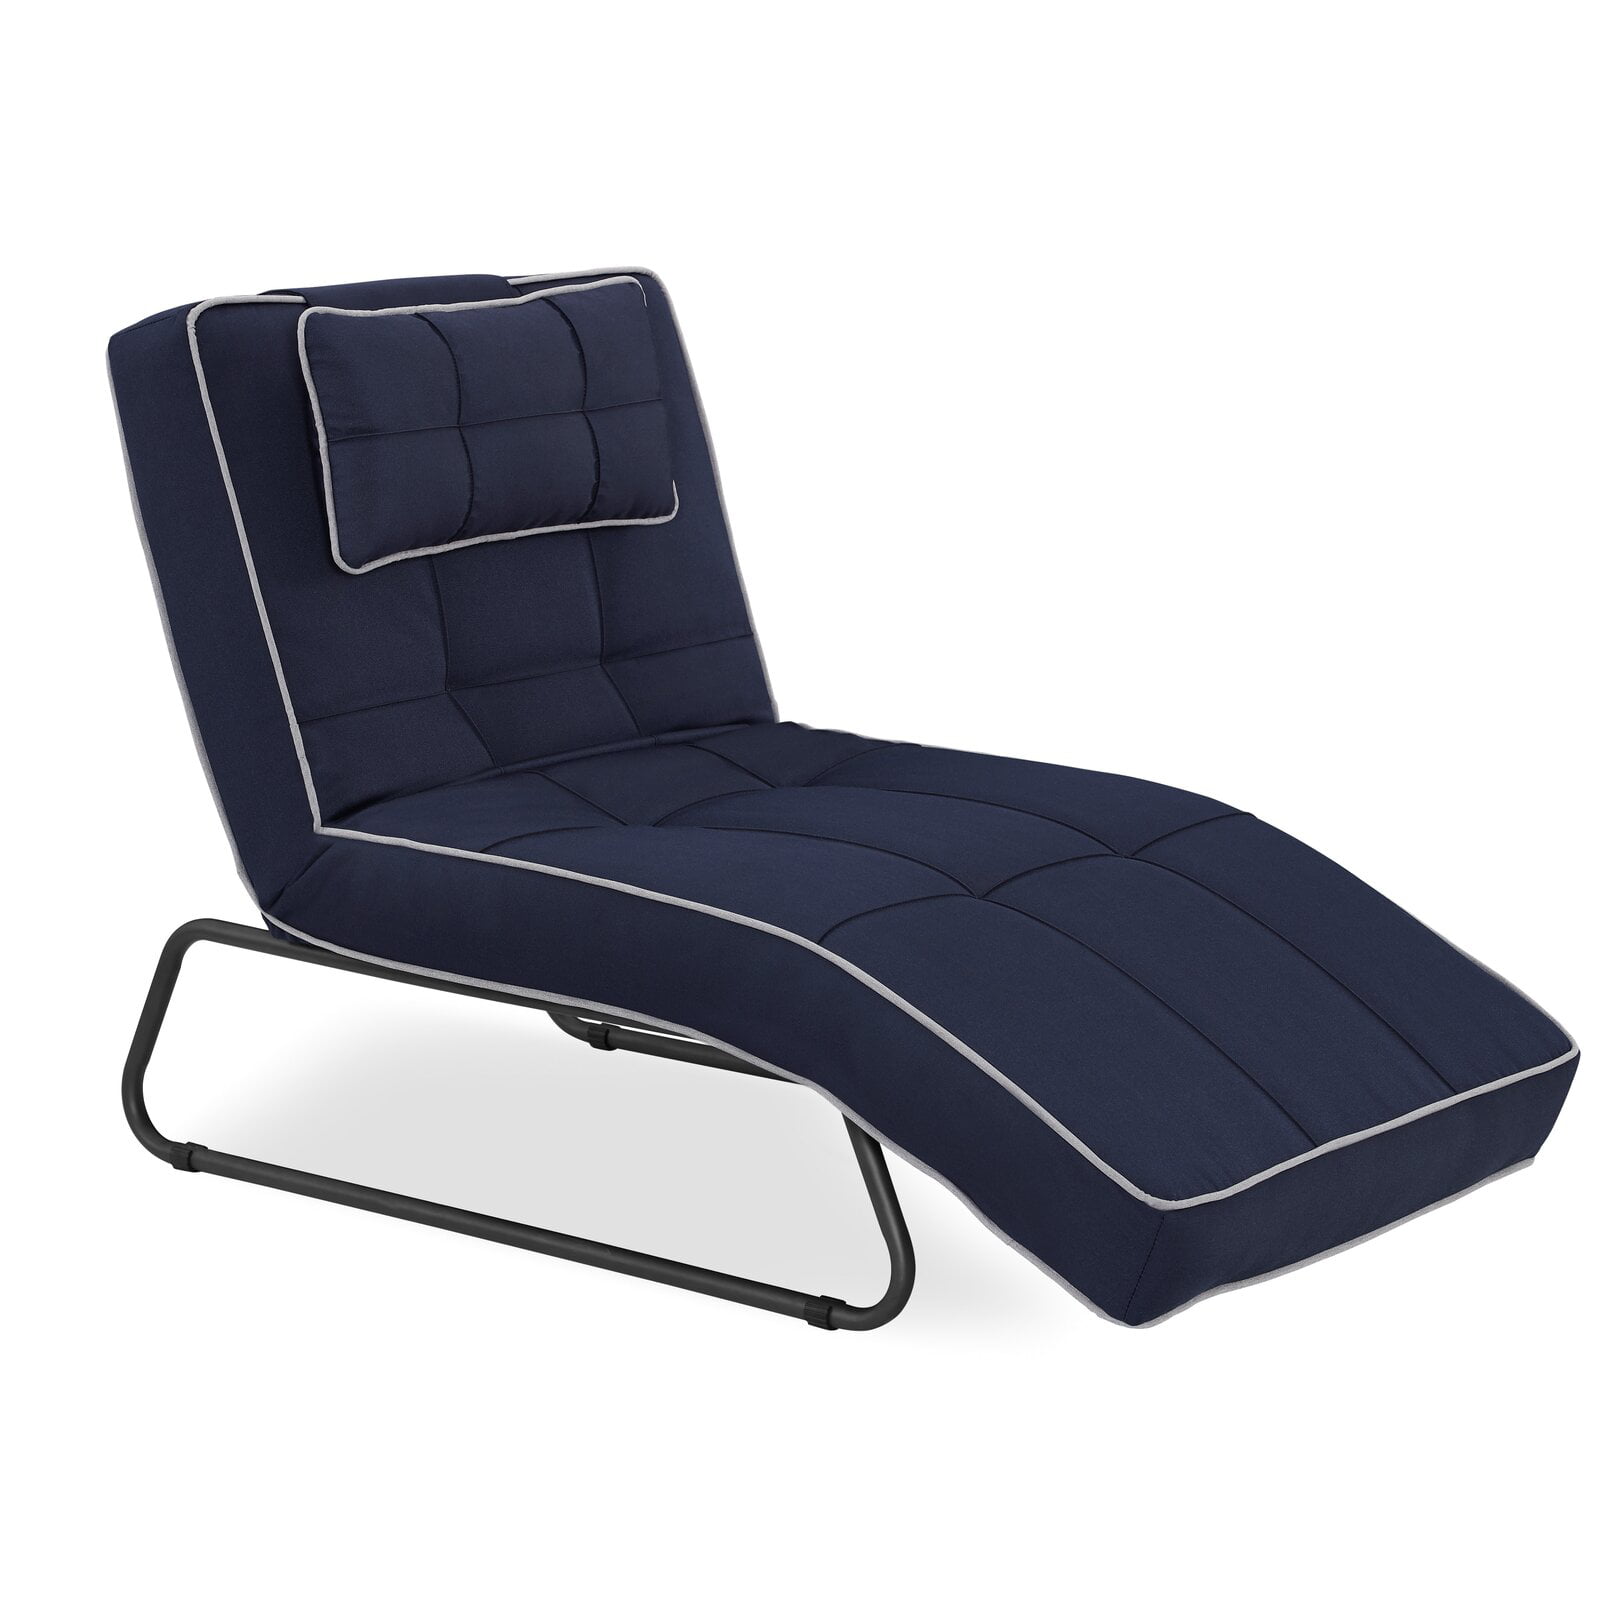 what is the best outdoor lounge chair